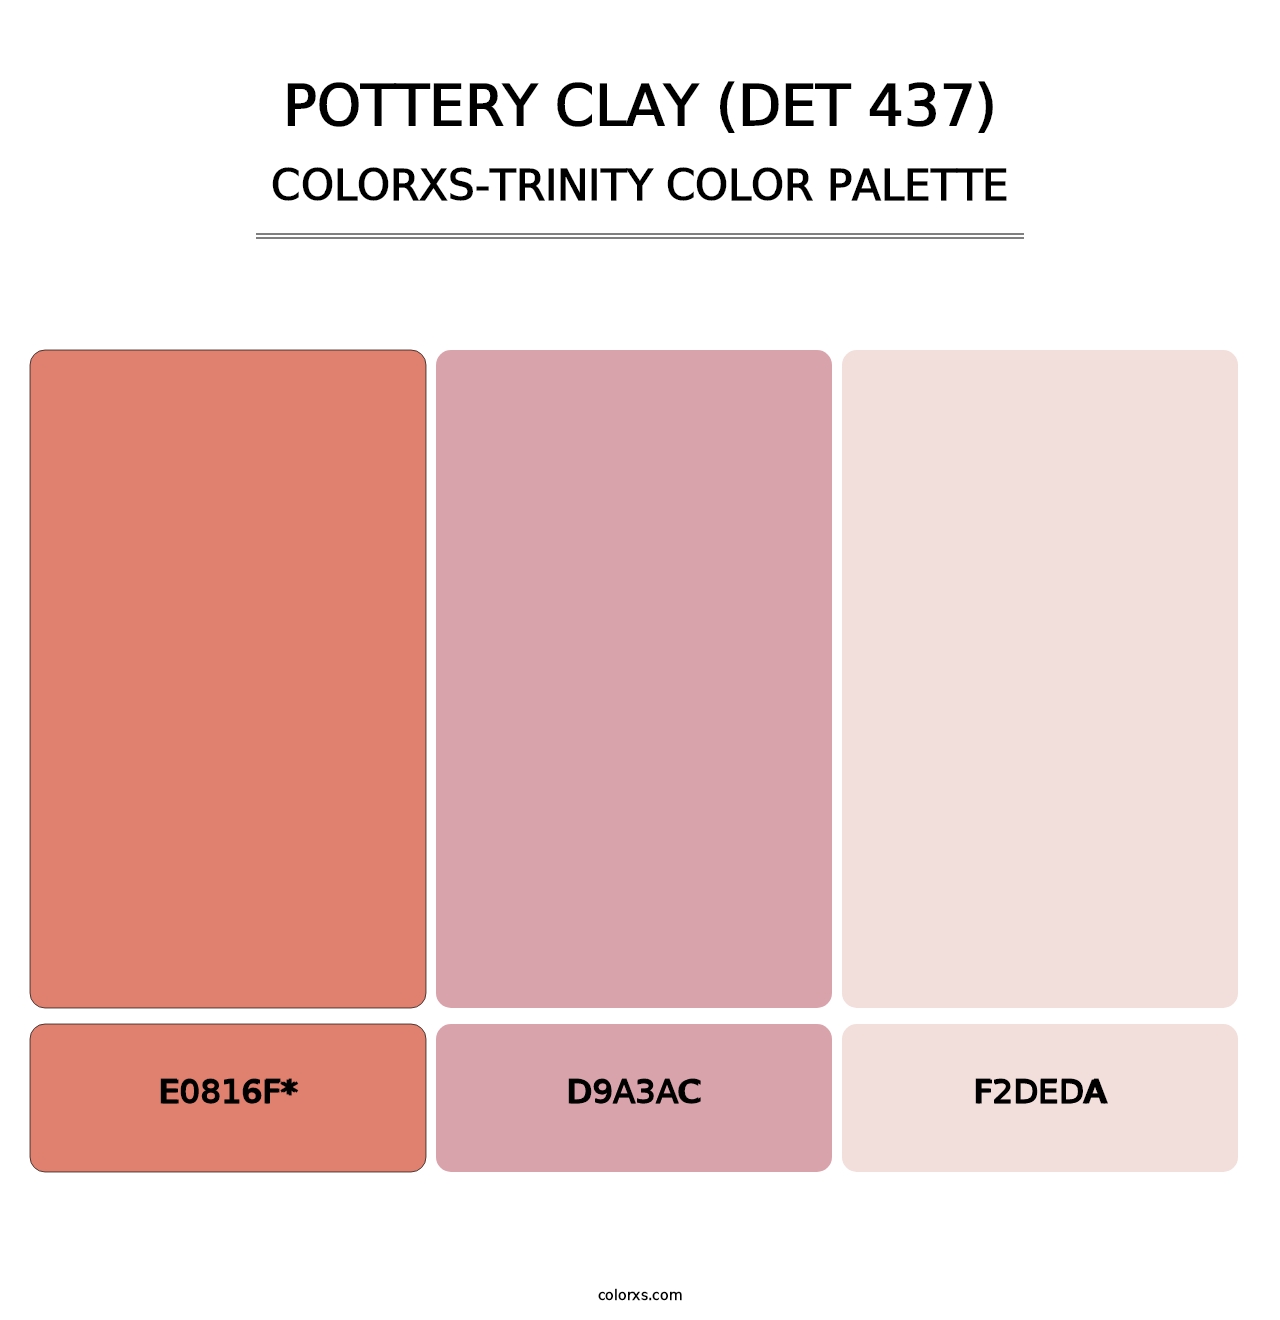 Pottery Clay (DET 437) - Colorxs Trinity Palette